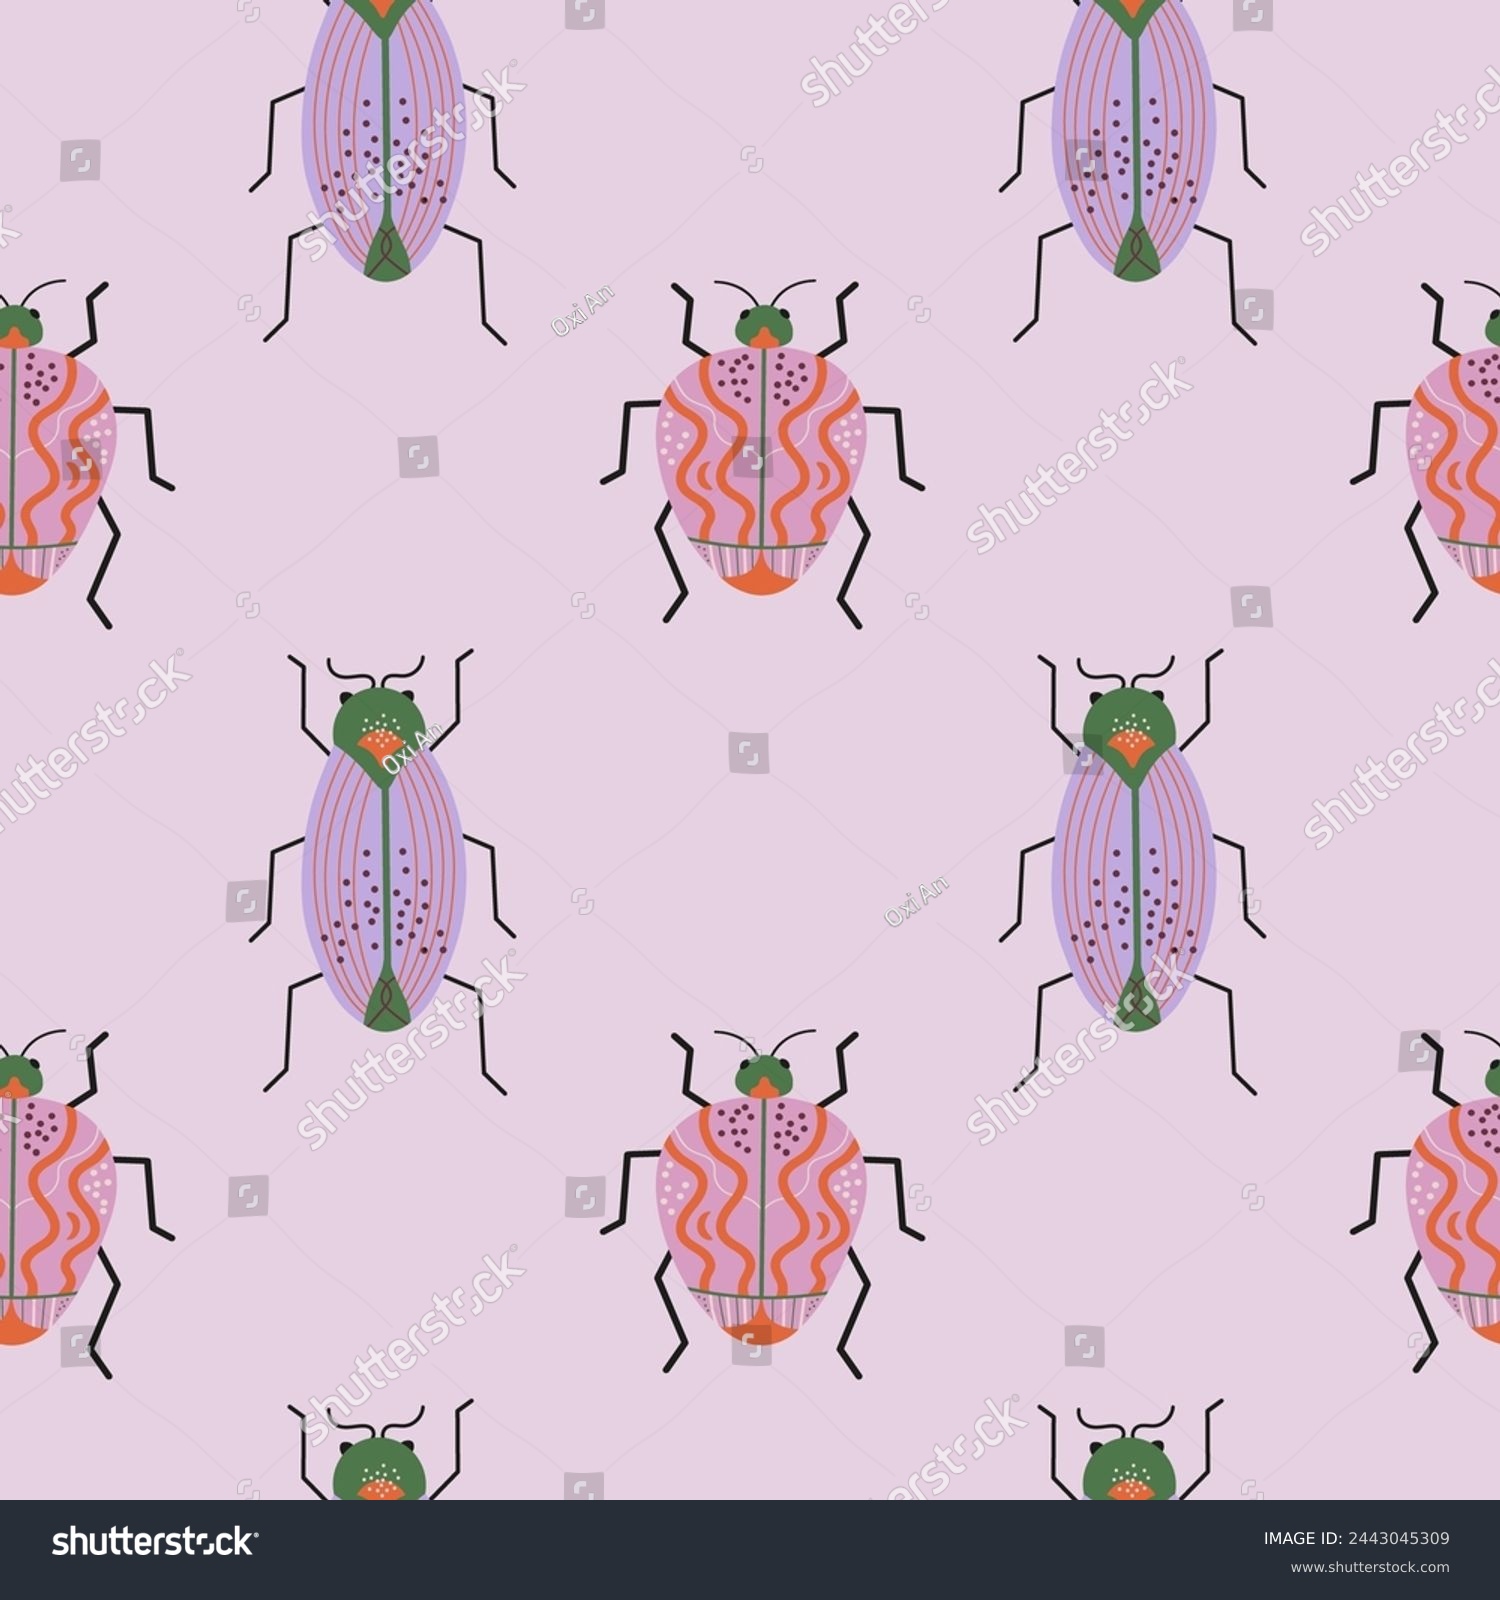 SVG of Beetles seamless pattern hand drawn flat vector illustration, fantastic bug repeating background. Decorative abstract Insect fantasy fauna species, wild life, animal. For textile, card, print, paper svg